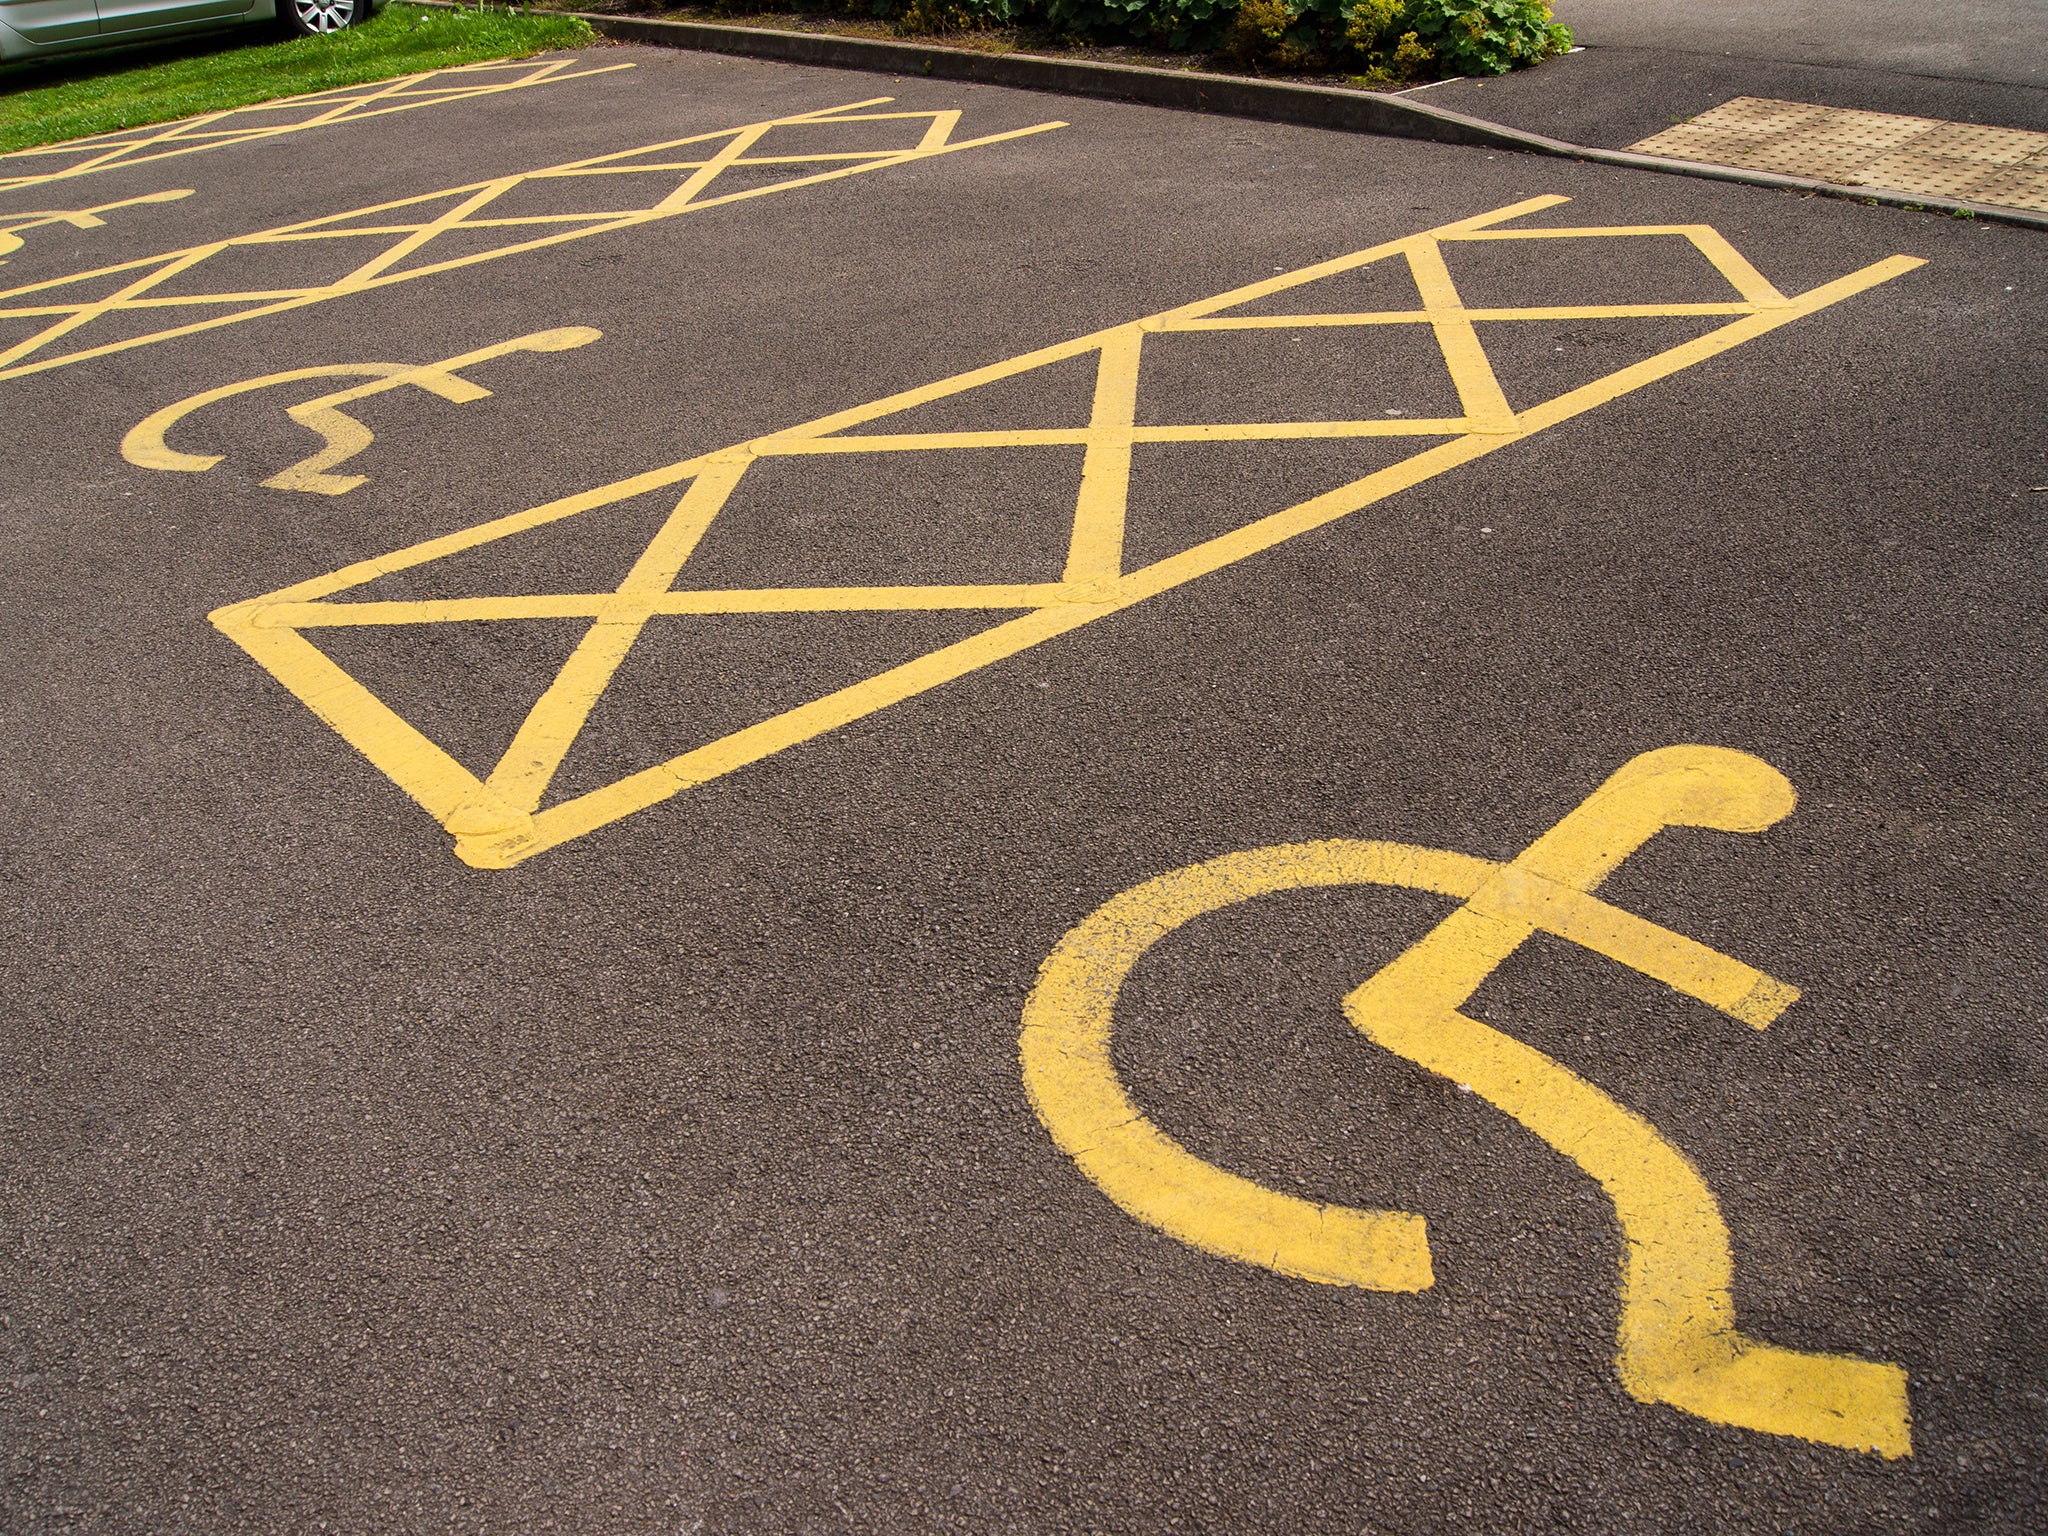 A report that emerged last week showed 112 NHS trusts have increased car parking charges